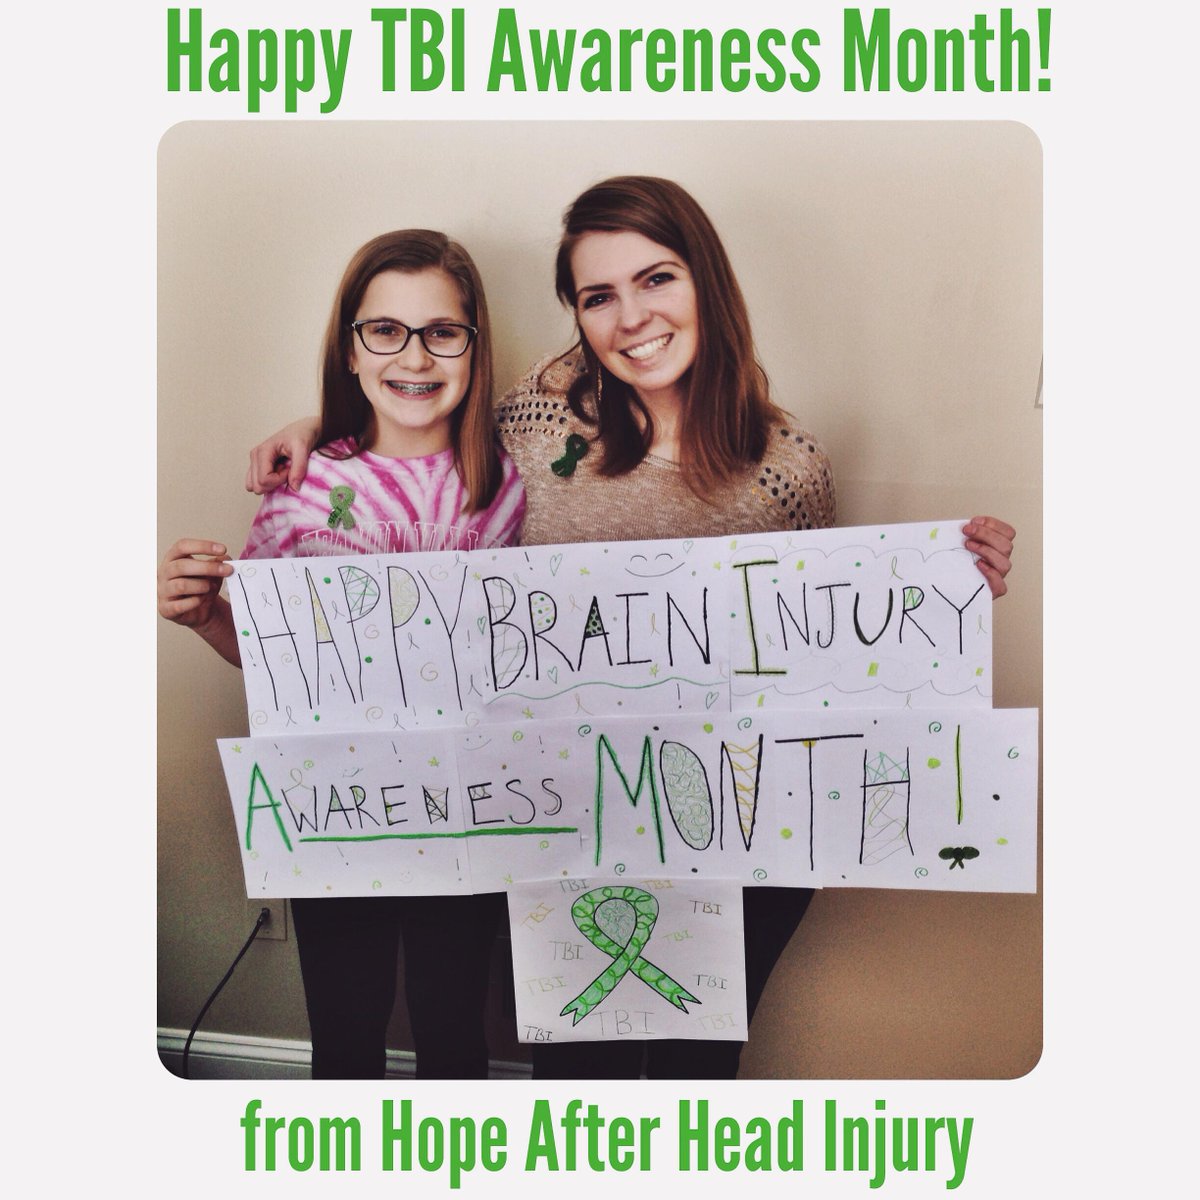 Happy #TBIAWARENESSMONTH! We are wearing green ribbons!! What are your ideas to spread awareness? 💚 -@itscristabelle